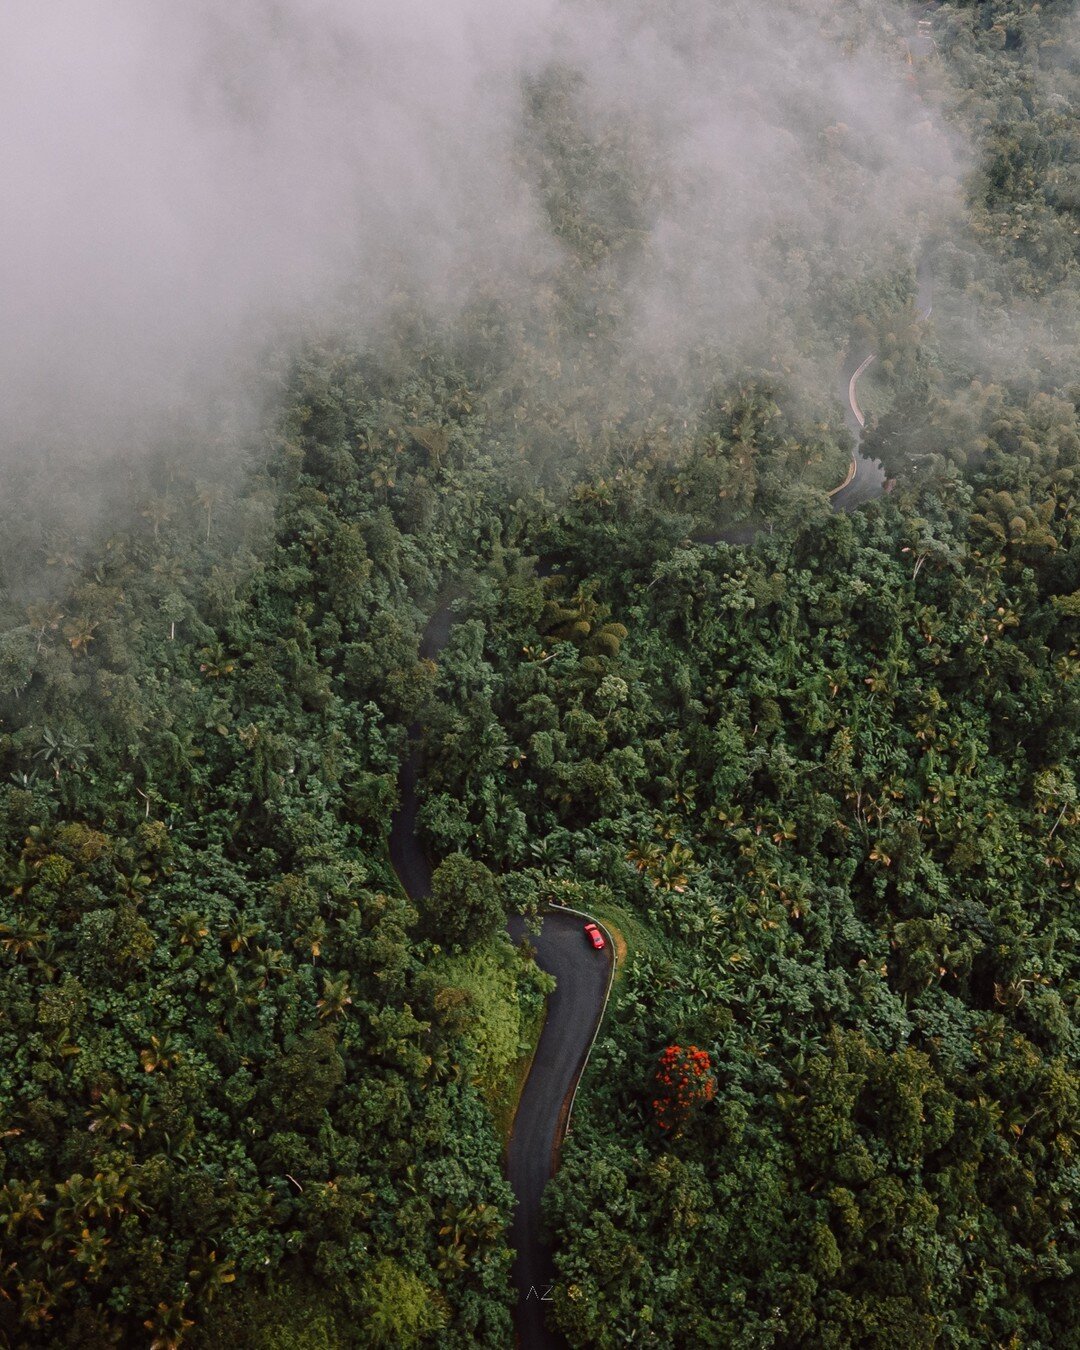 One of my favorite traveling experiences captured here in this drone shot 📸 -- I remember flying while fog grazed across my frame 🌫️...I was so excited to see and feel the moments up here. Just after it rained, I saw a sea of green split by one win